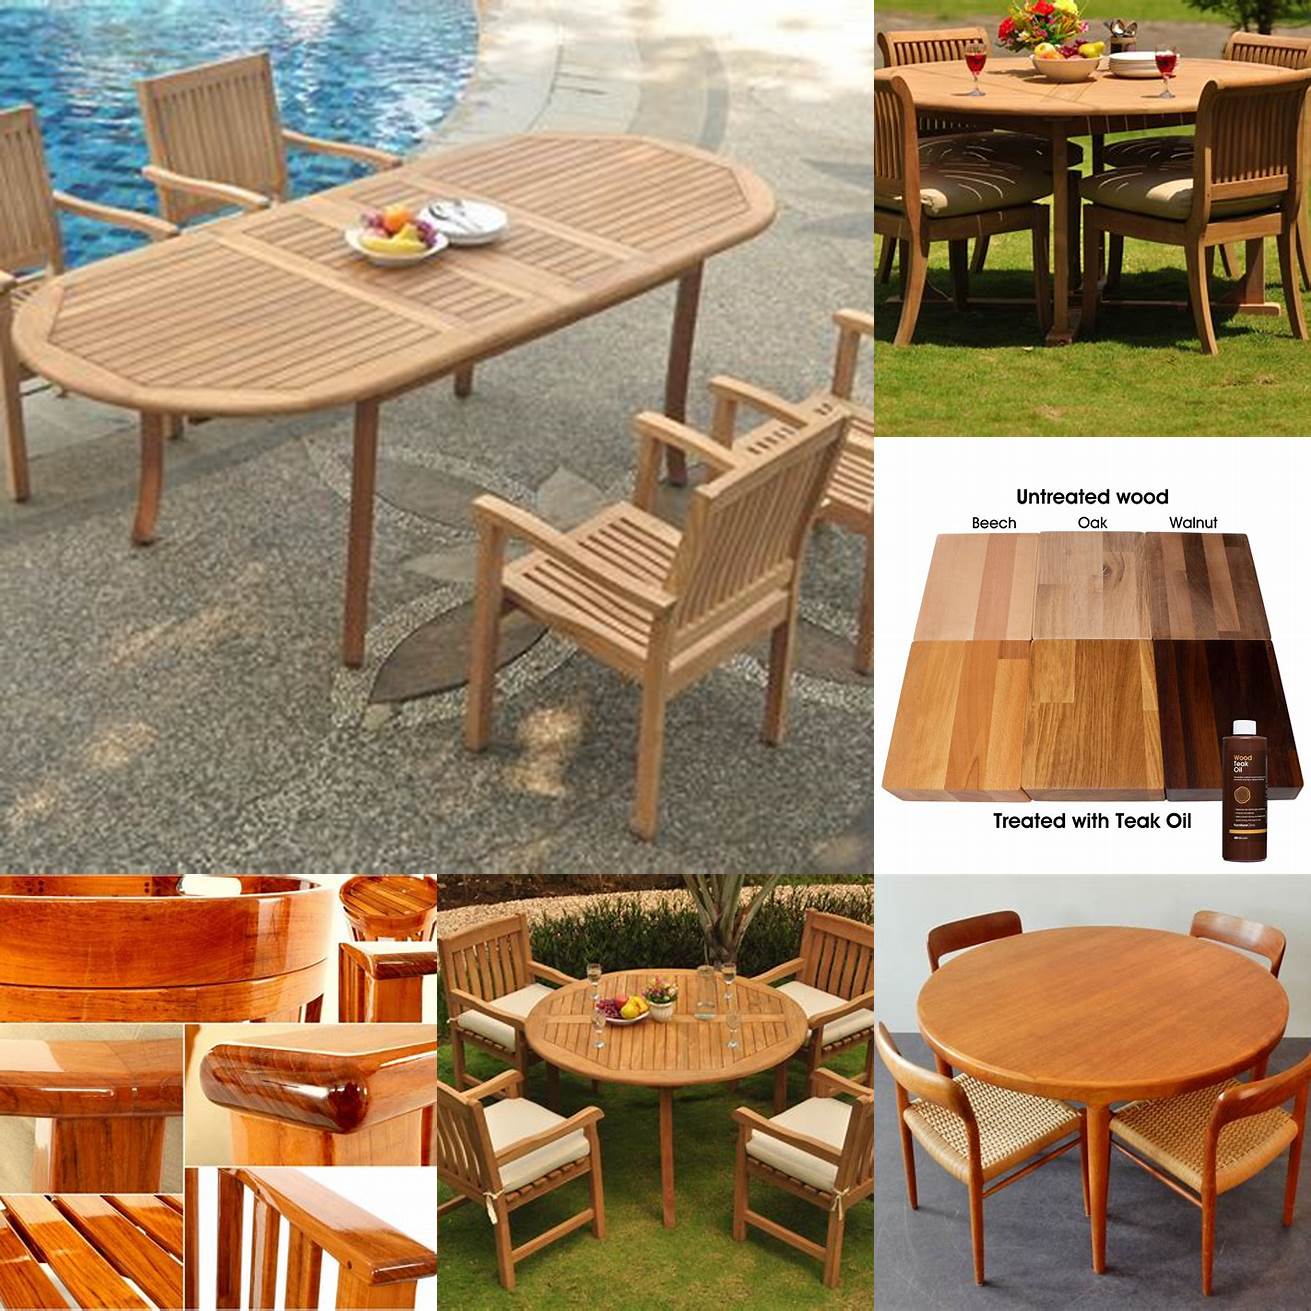 Teak furniture with different finishes